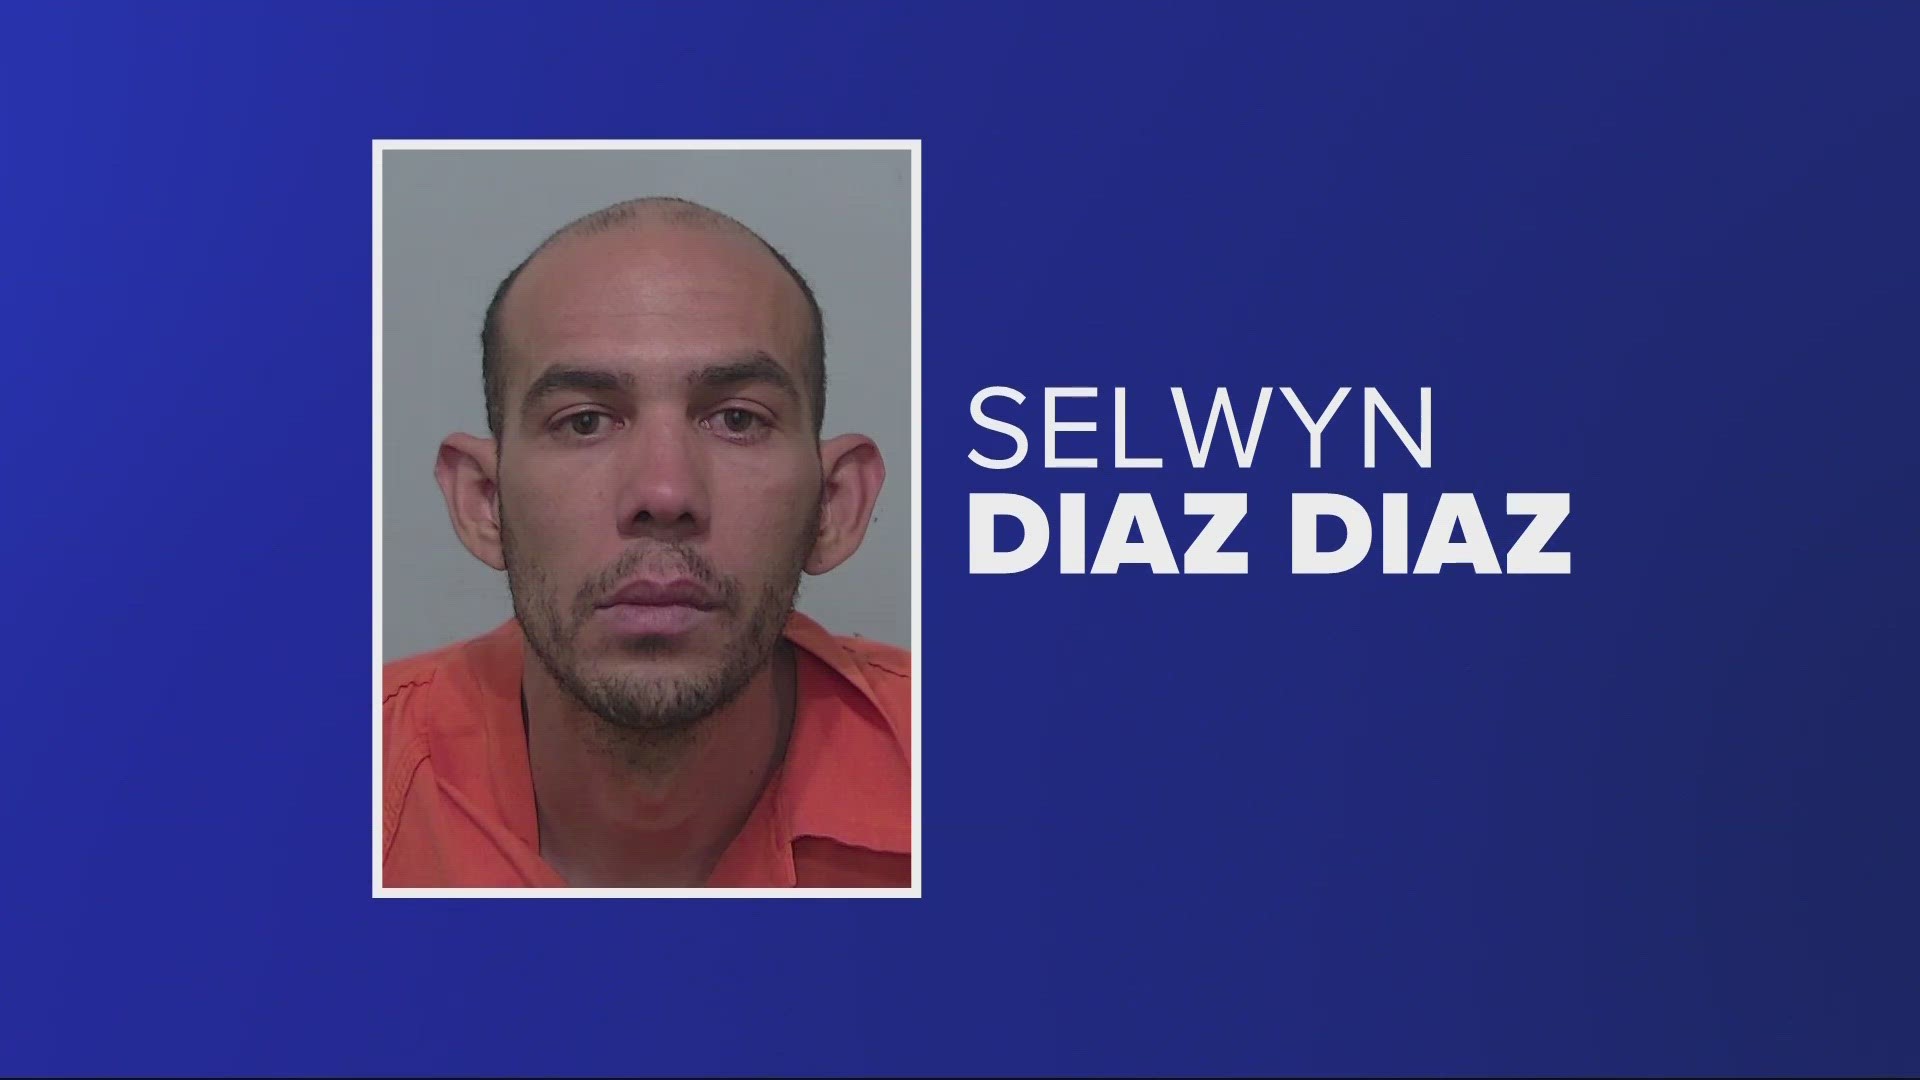 Selwyn Yomar Diaz Diaz, 35, was apprehended by Columbia County detectives after he had been communicating with who he thought was a 14-year-old girl.